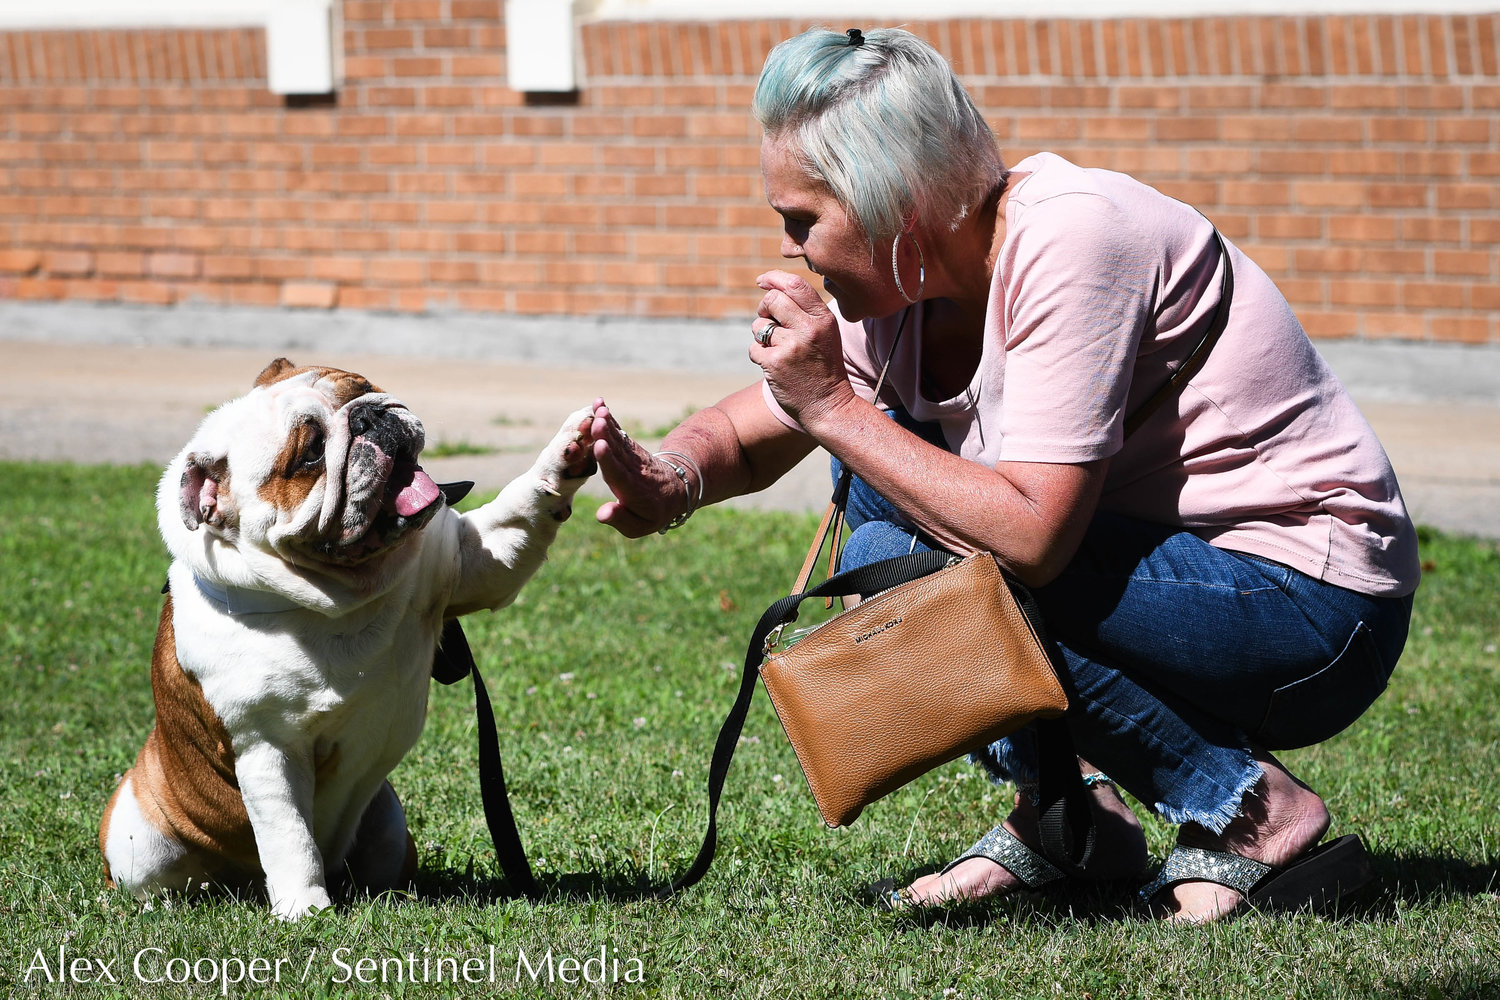 Caesar, an English bulldog, gives his owner Jackie Jackson a high-five while participating in the talent category of a dog show hosted by the Herkimer County Humane Society on Saturday at Central Plaza in Ilion. The show was part of a long list of events hosted during Ilion Days 2022 from July 16-24.